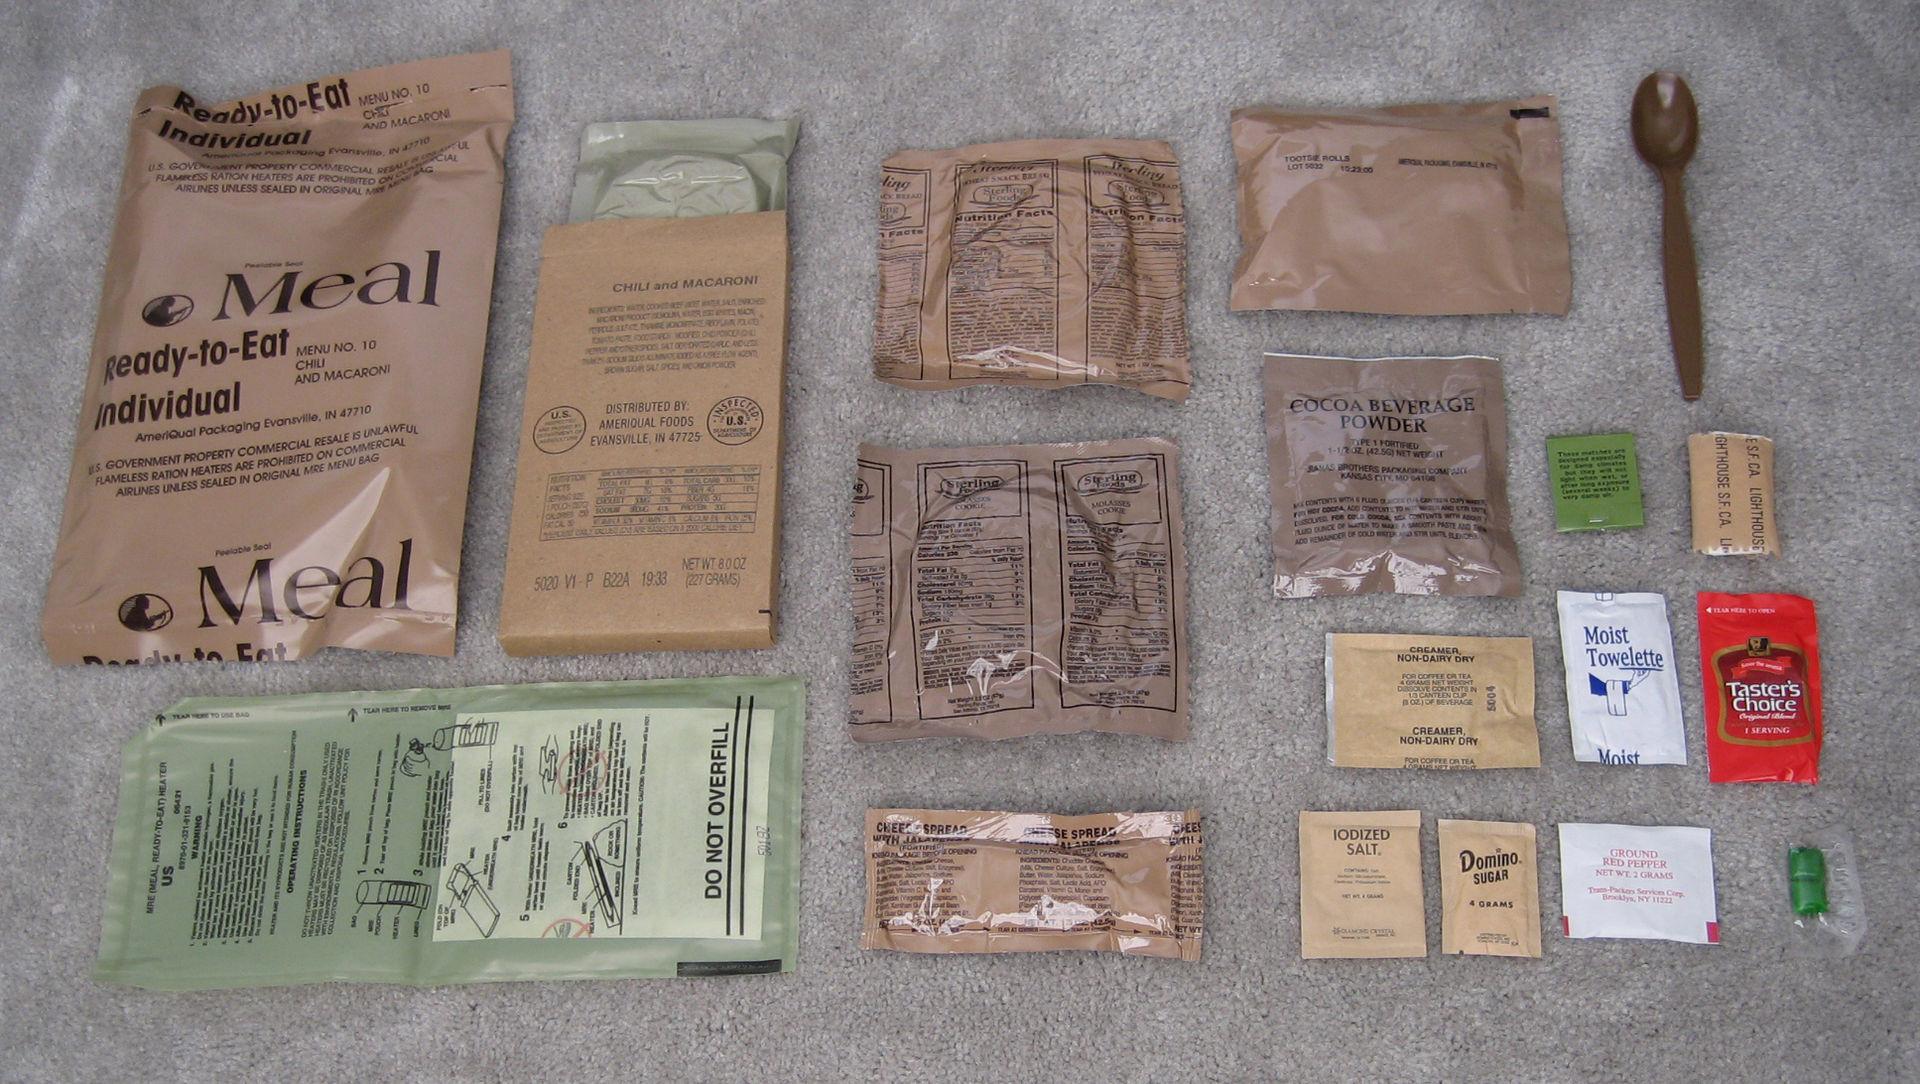 The contents of an MRE (Meals Ready to Eat)